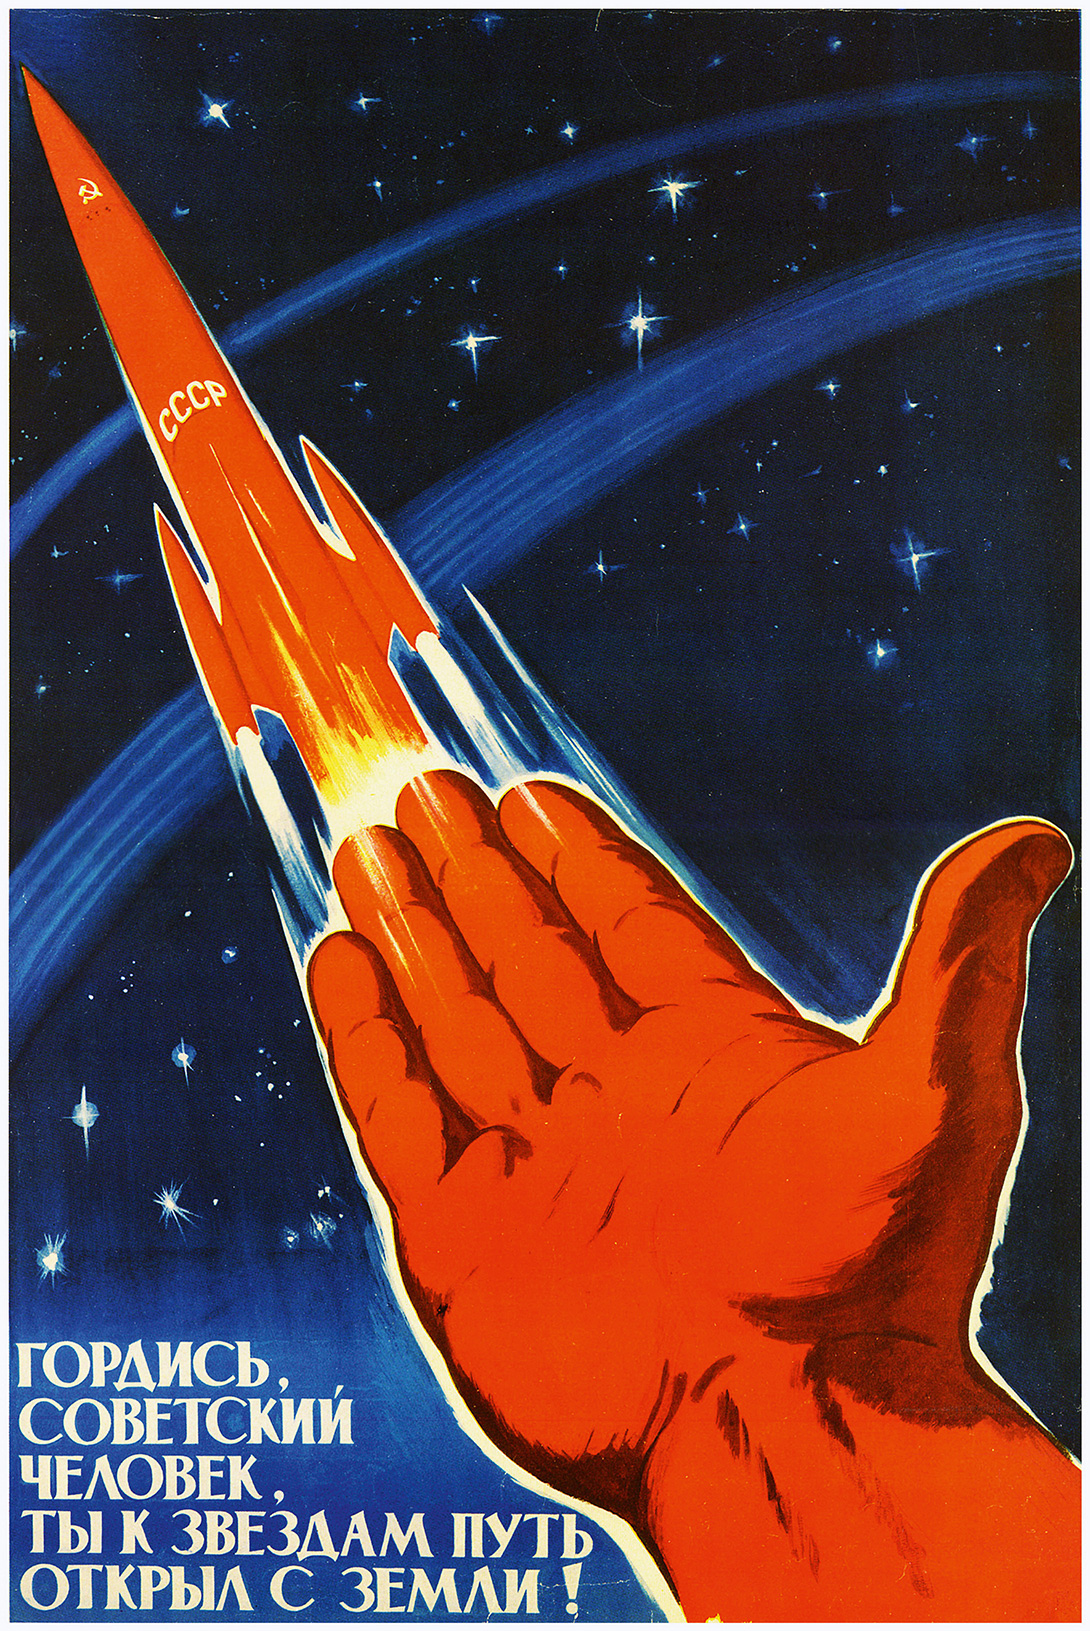 Soviet Space Programme Poster, 1963, as reproduced in Universe